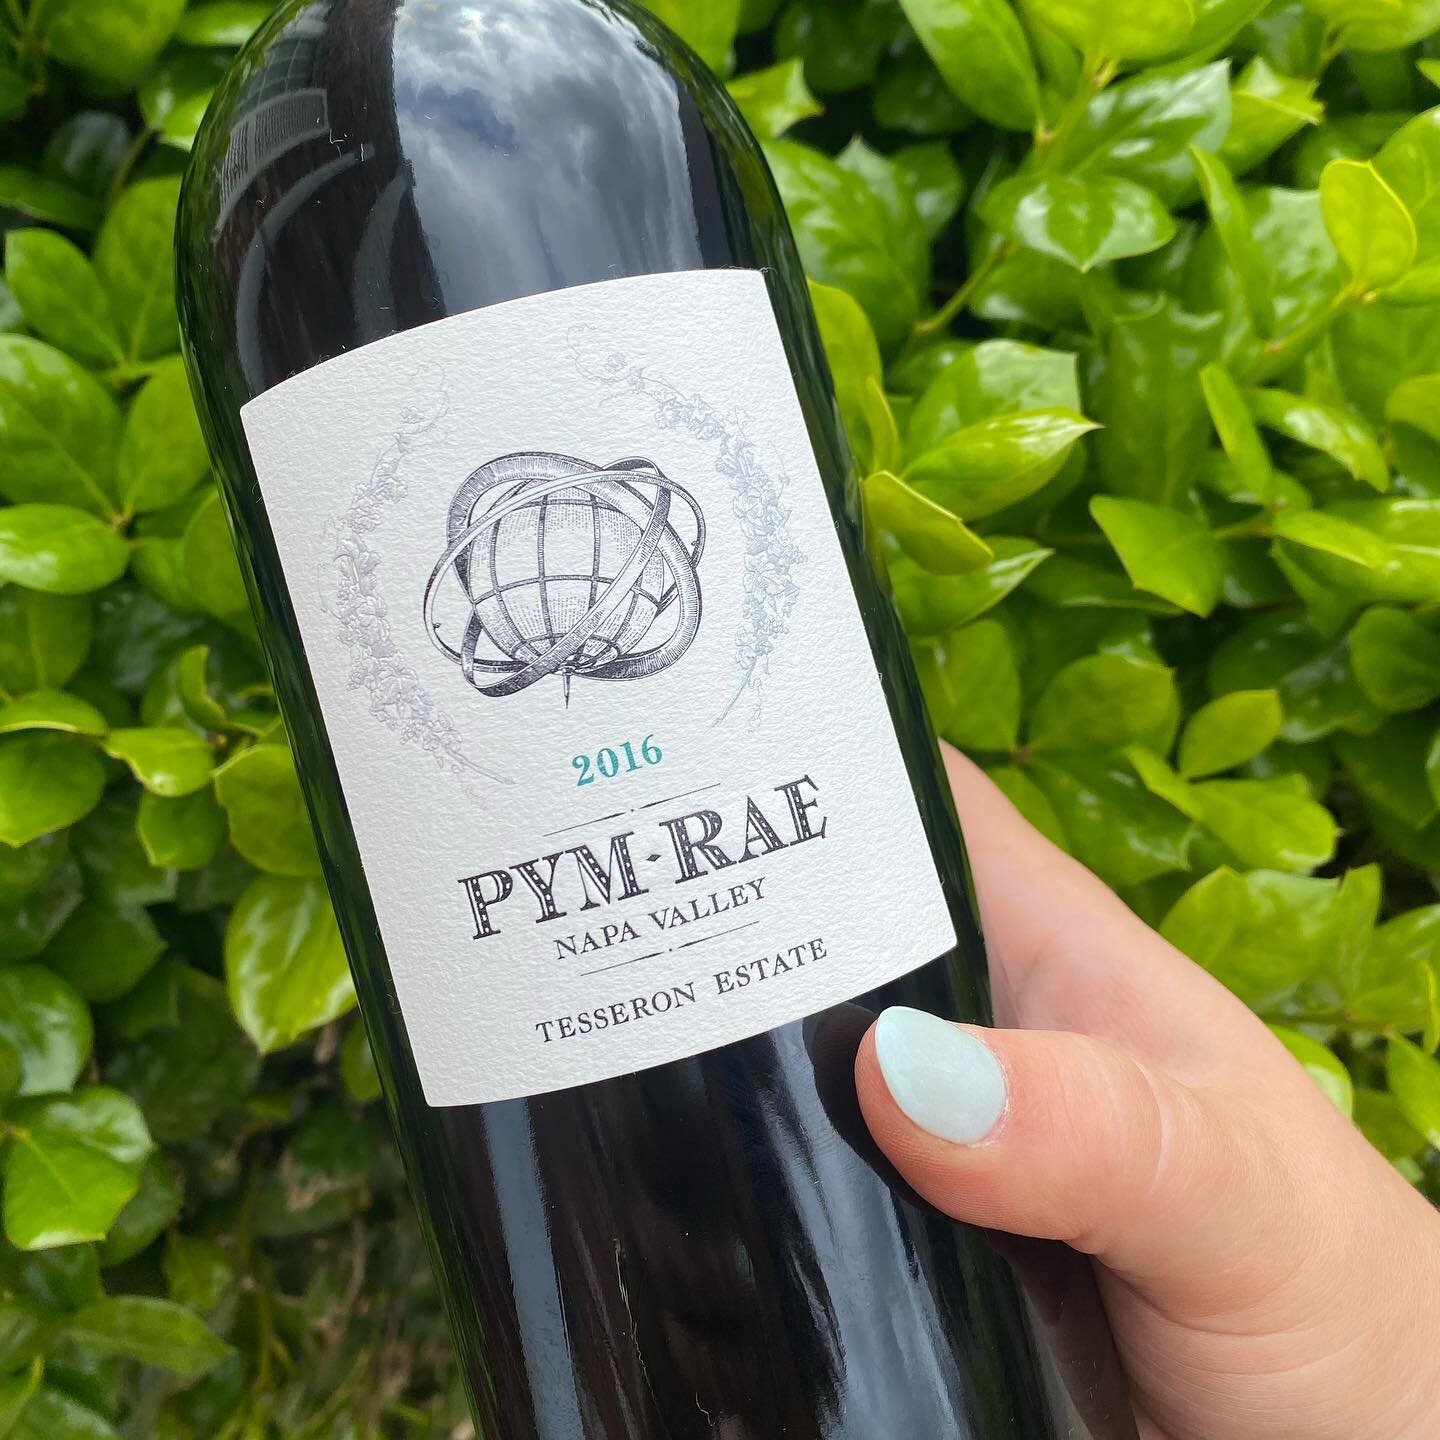 Currently crushing on this 2016 Pym-Rae Cabernet Sauvignon out of Mount Veeder in Napa 🍷

100% dry-farmed estate fruit from the Pym-Rae vineyard, formerly owned by Robin Williams and now owned by the Tesseron family of Tesseron Cognac.

&ldquo;Pym-R